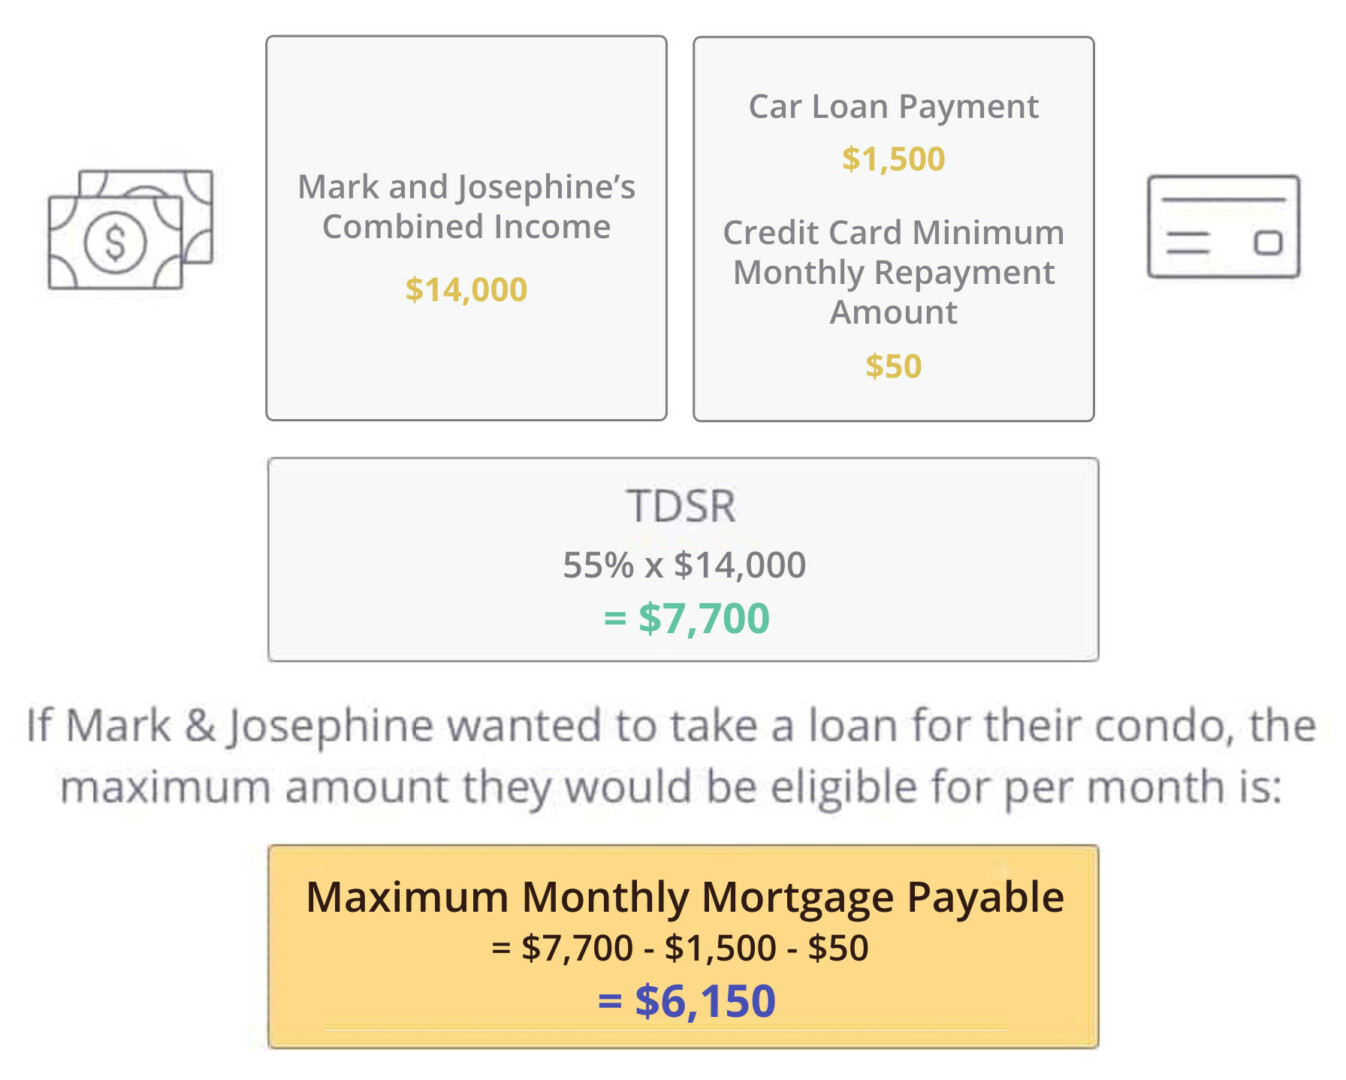 Calculating the maximum monthly mortgage payable for the couple, with their current debts, after TDSR restrictions